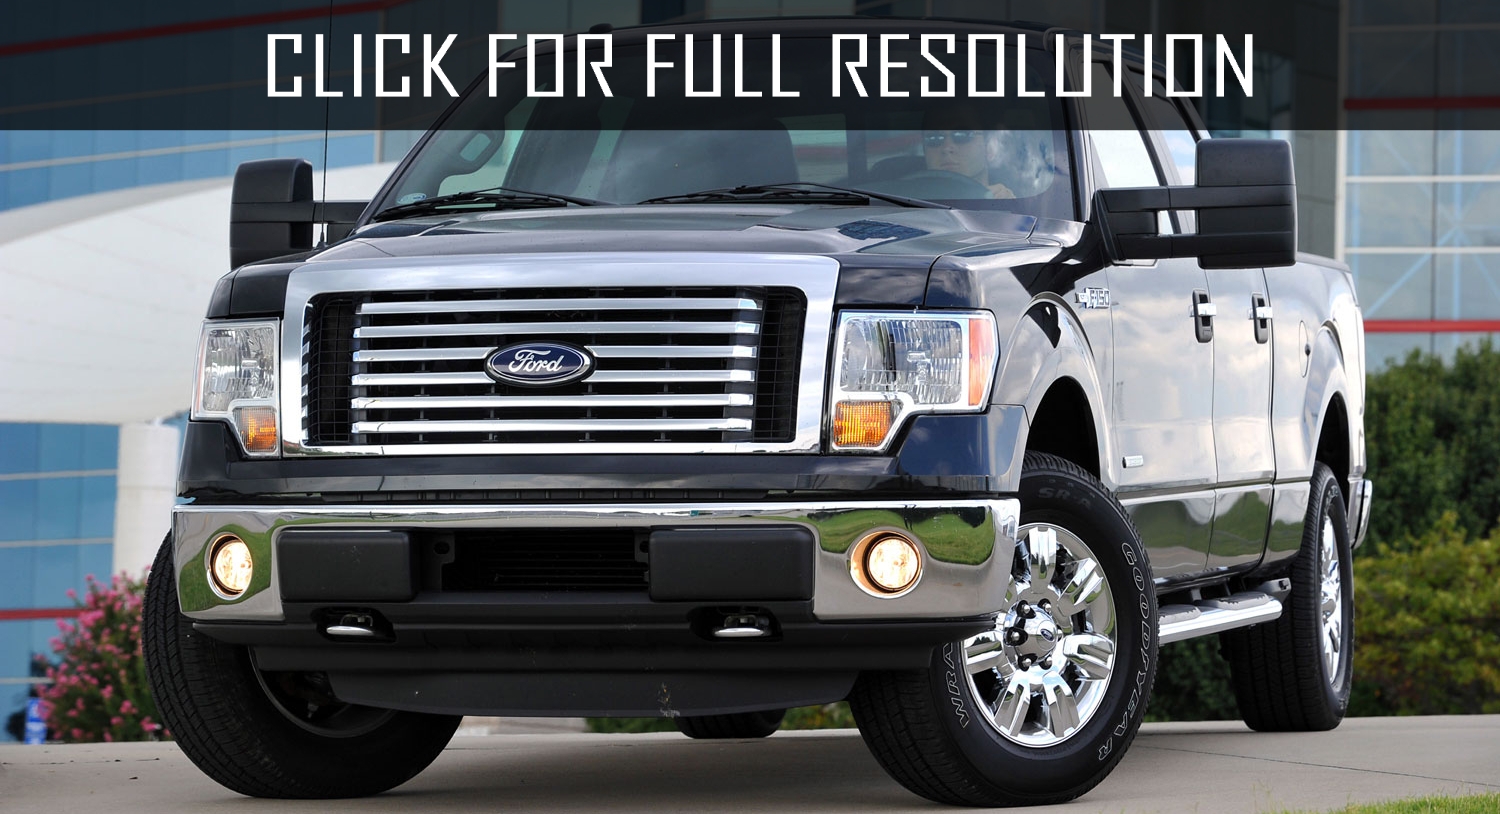 2012 Ford F-150 Ecoboost